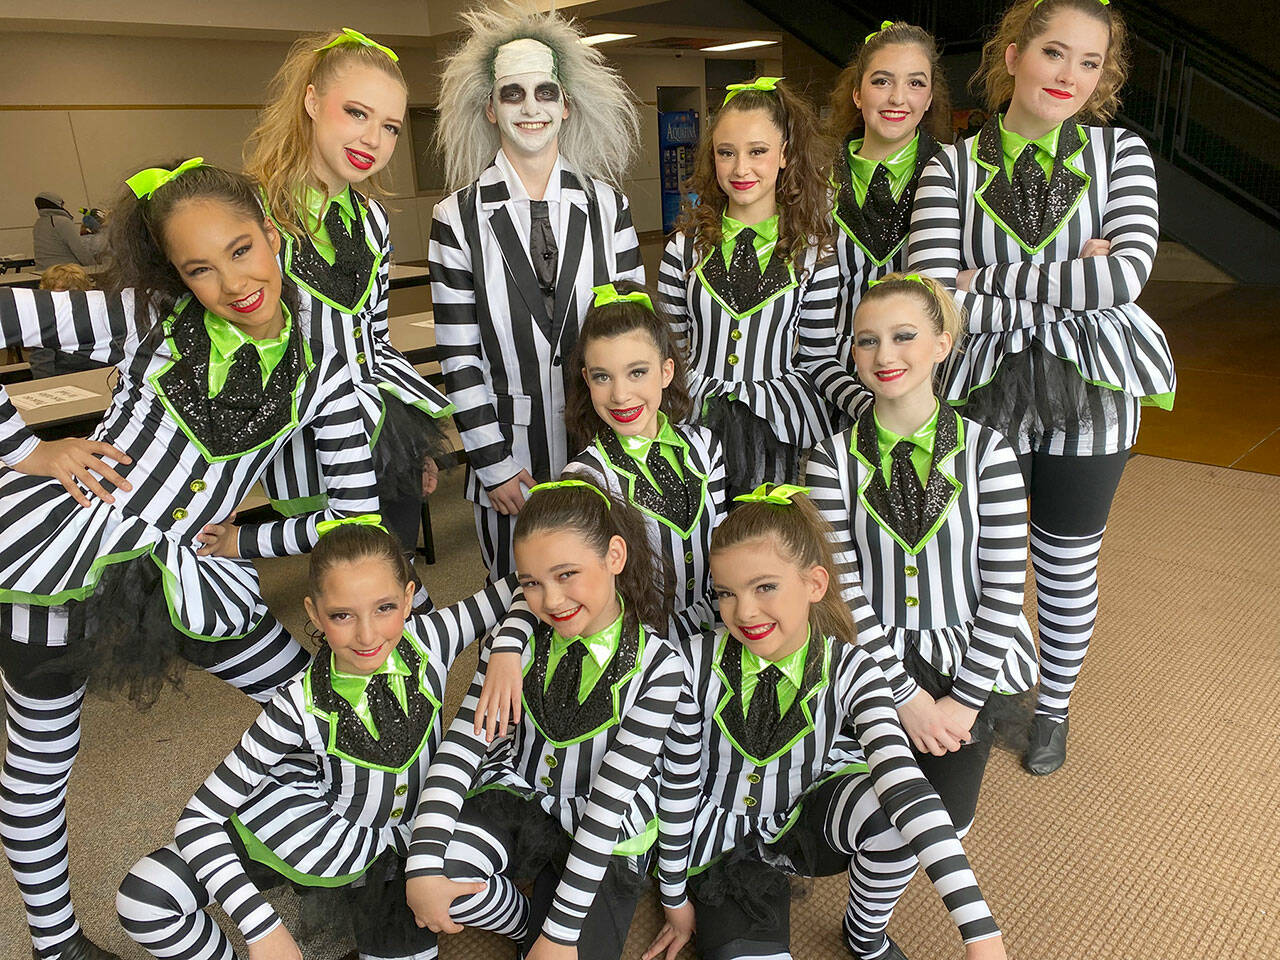 The Elite Competition Dance Team from The Dance Center by Erica Edwards in Sequim recently earned a Judge’s Choice award and an invitation to perform in New York City for their musical theater large group routine “Beetlejuice.” Team members include, in no particular order, Madison Edwards, Ayla Alstrup, Sofia Divinsky, Sydney Owens, Cyrus Deede, Eva Lancheros-Gillis, Joyce Caulfield, Ava Fuller, Emma Edwards, Mia Buhrer, Addysin Smith, Savanna DeRuyter, Tosca Kattau and Julianne Wilcox.